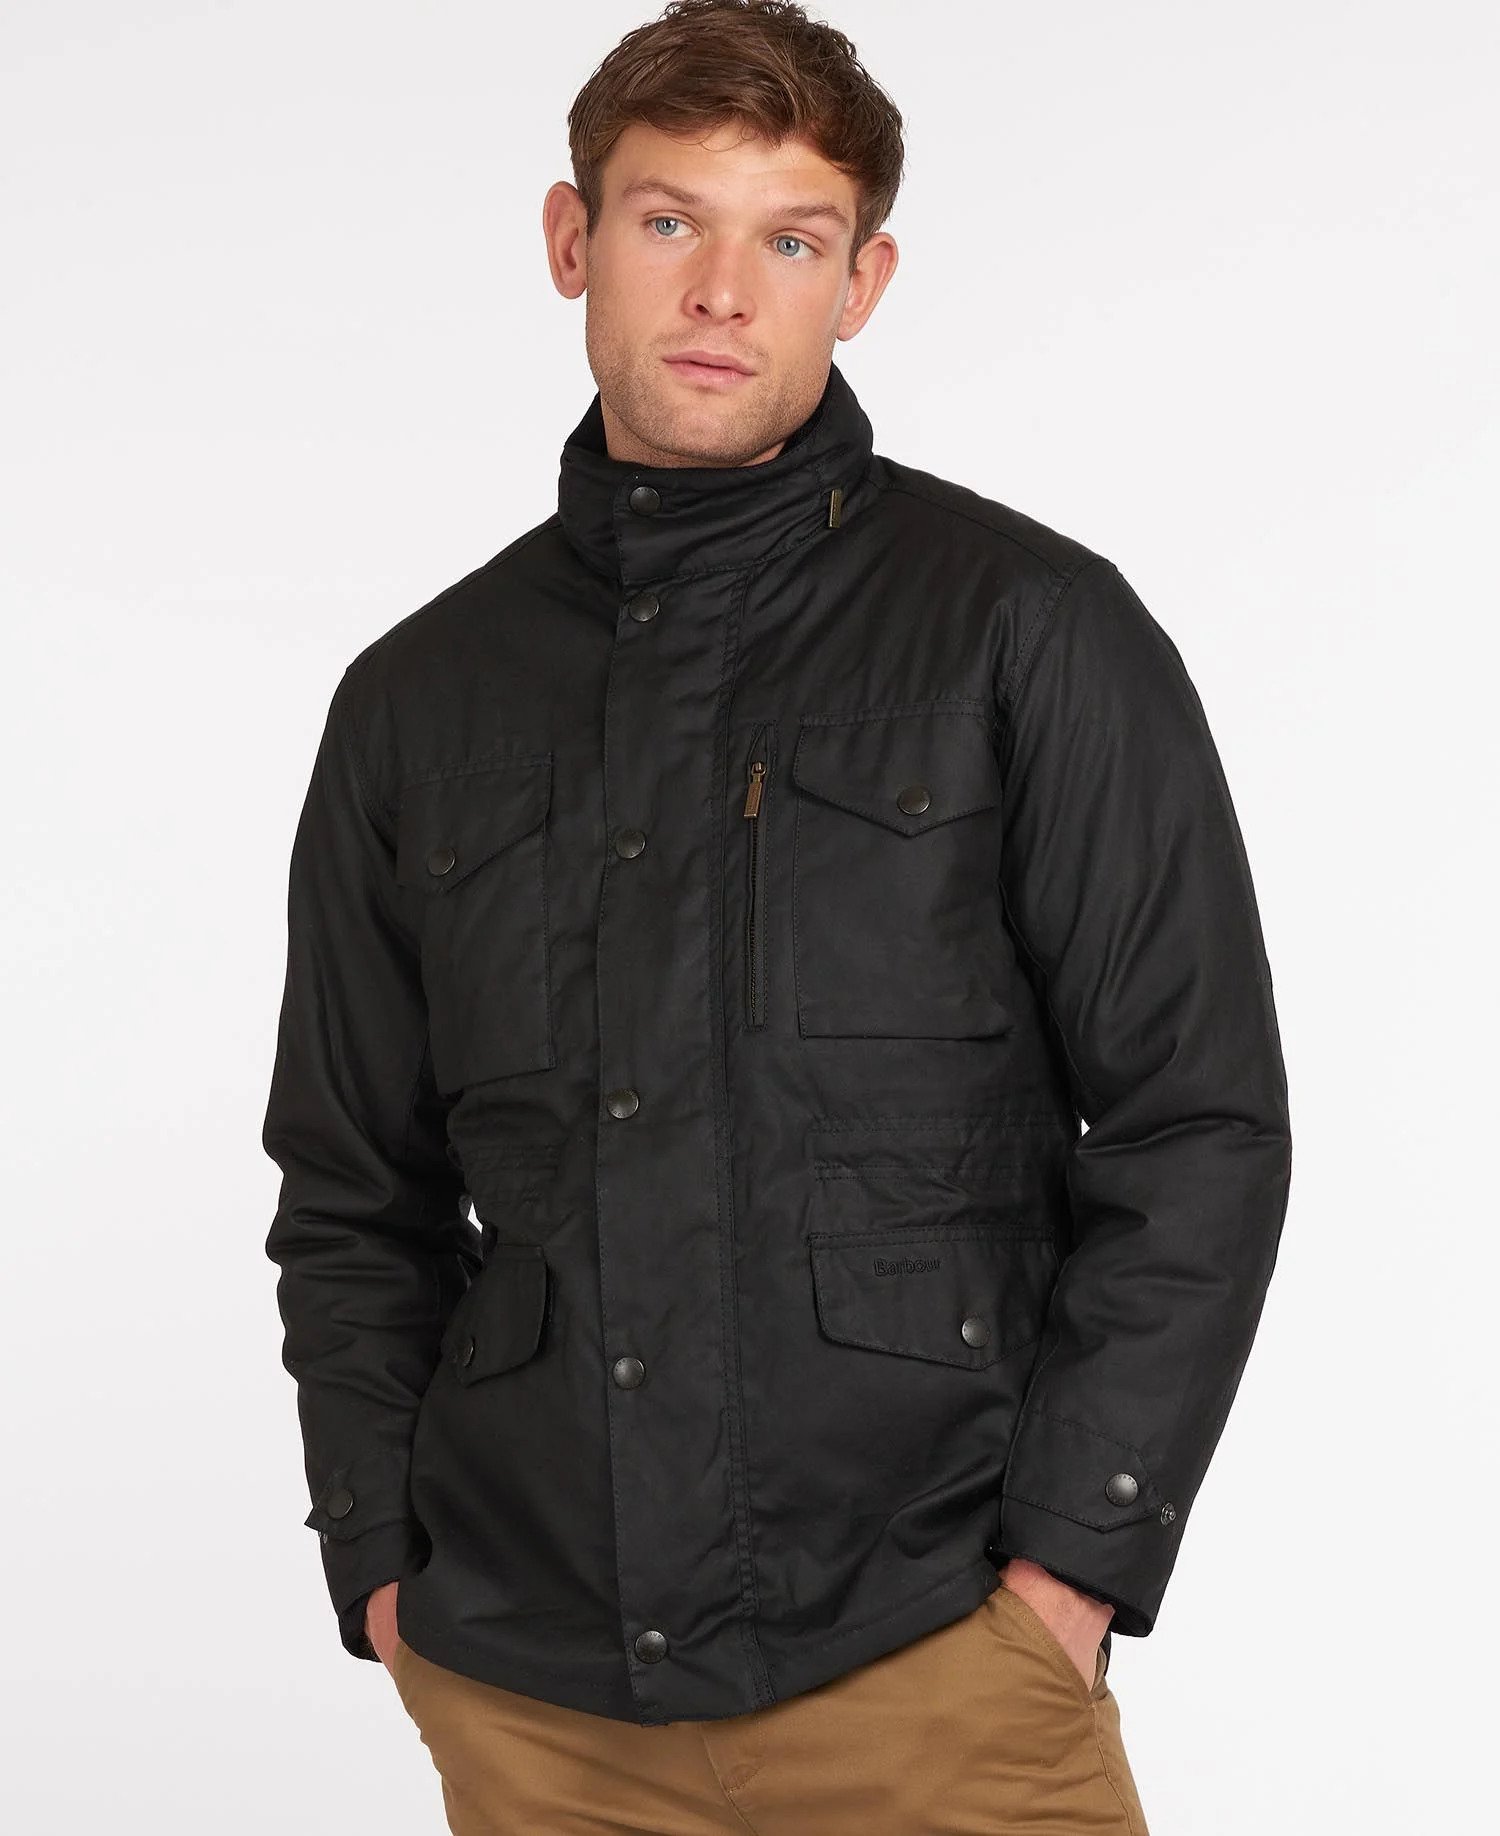 Men's Wax Jackets: A Guide to Barbour Jacket Styles | Barbour